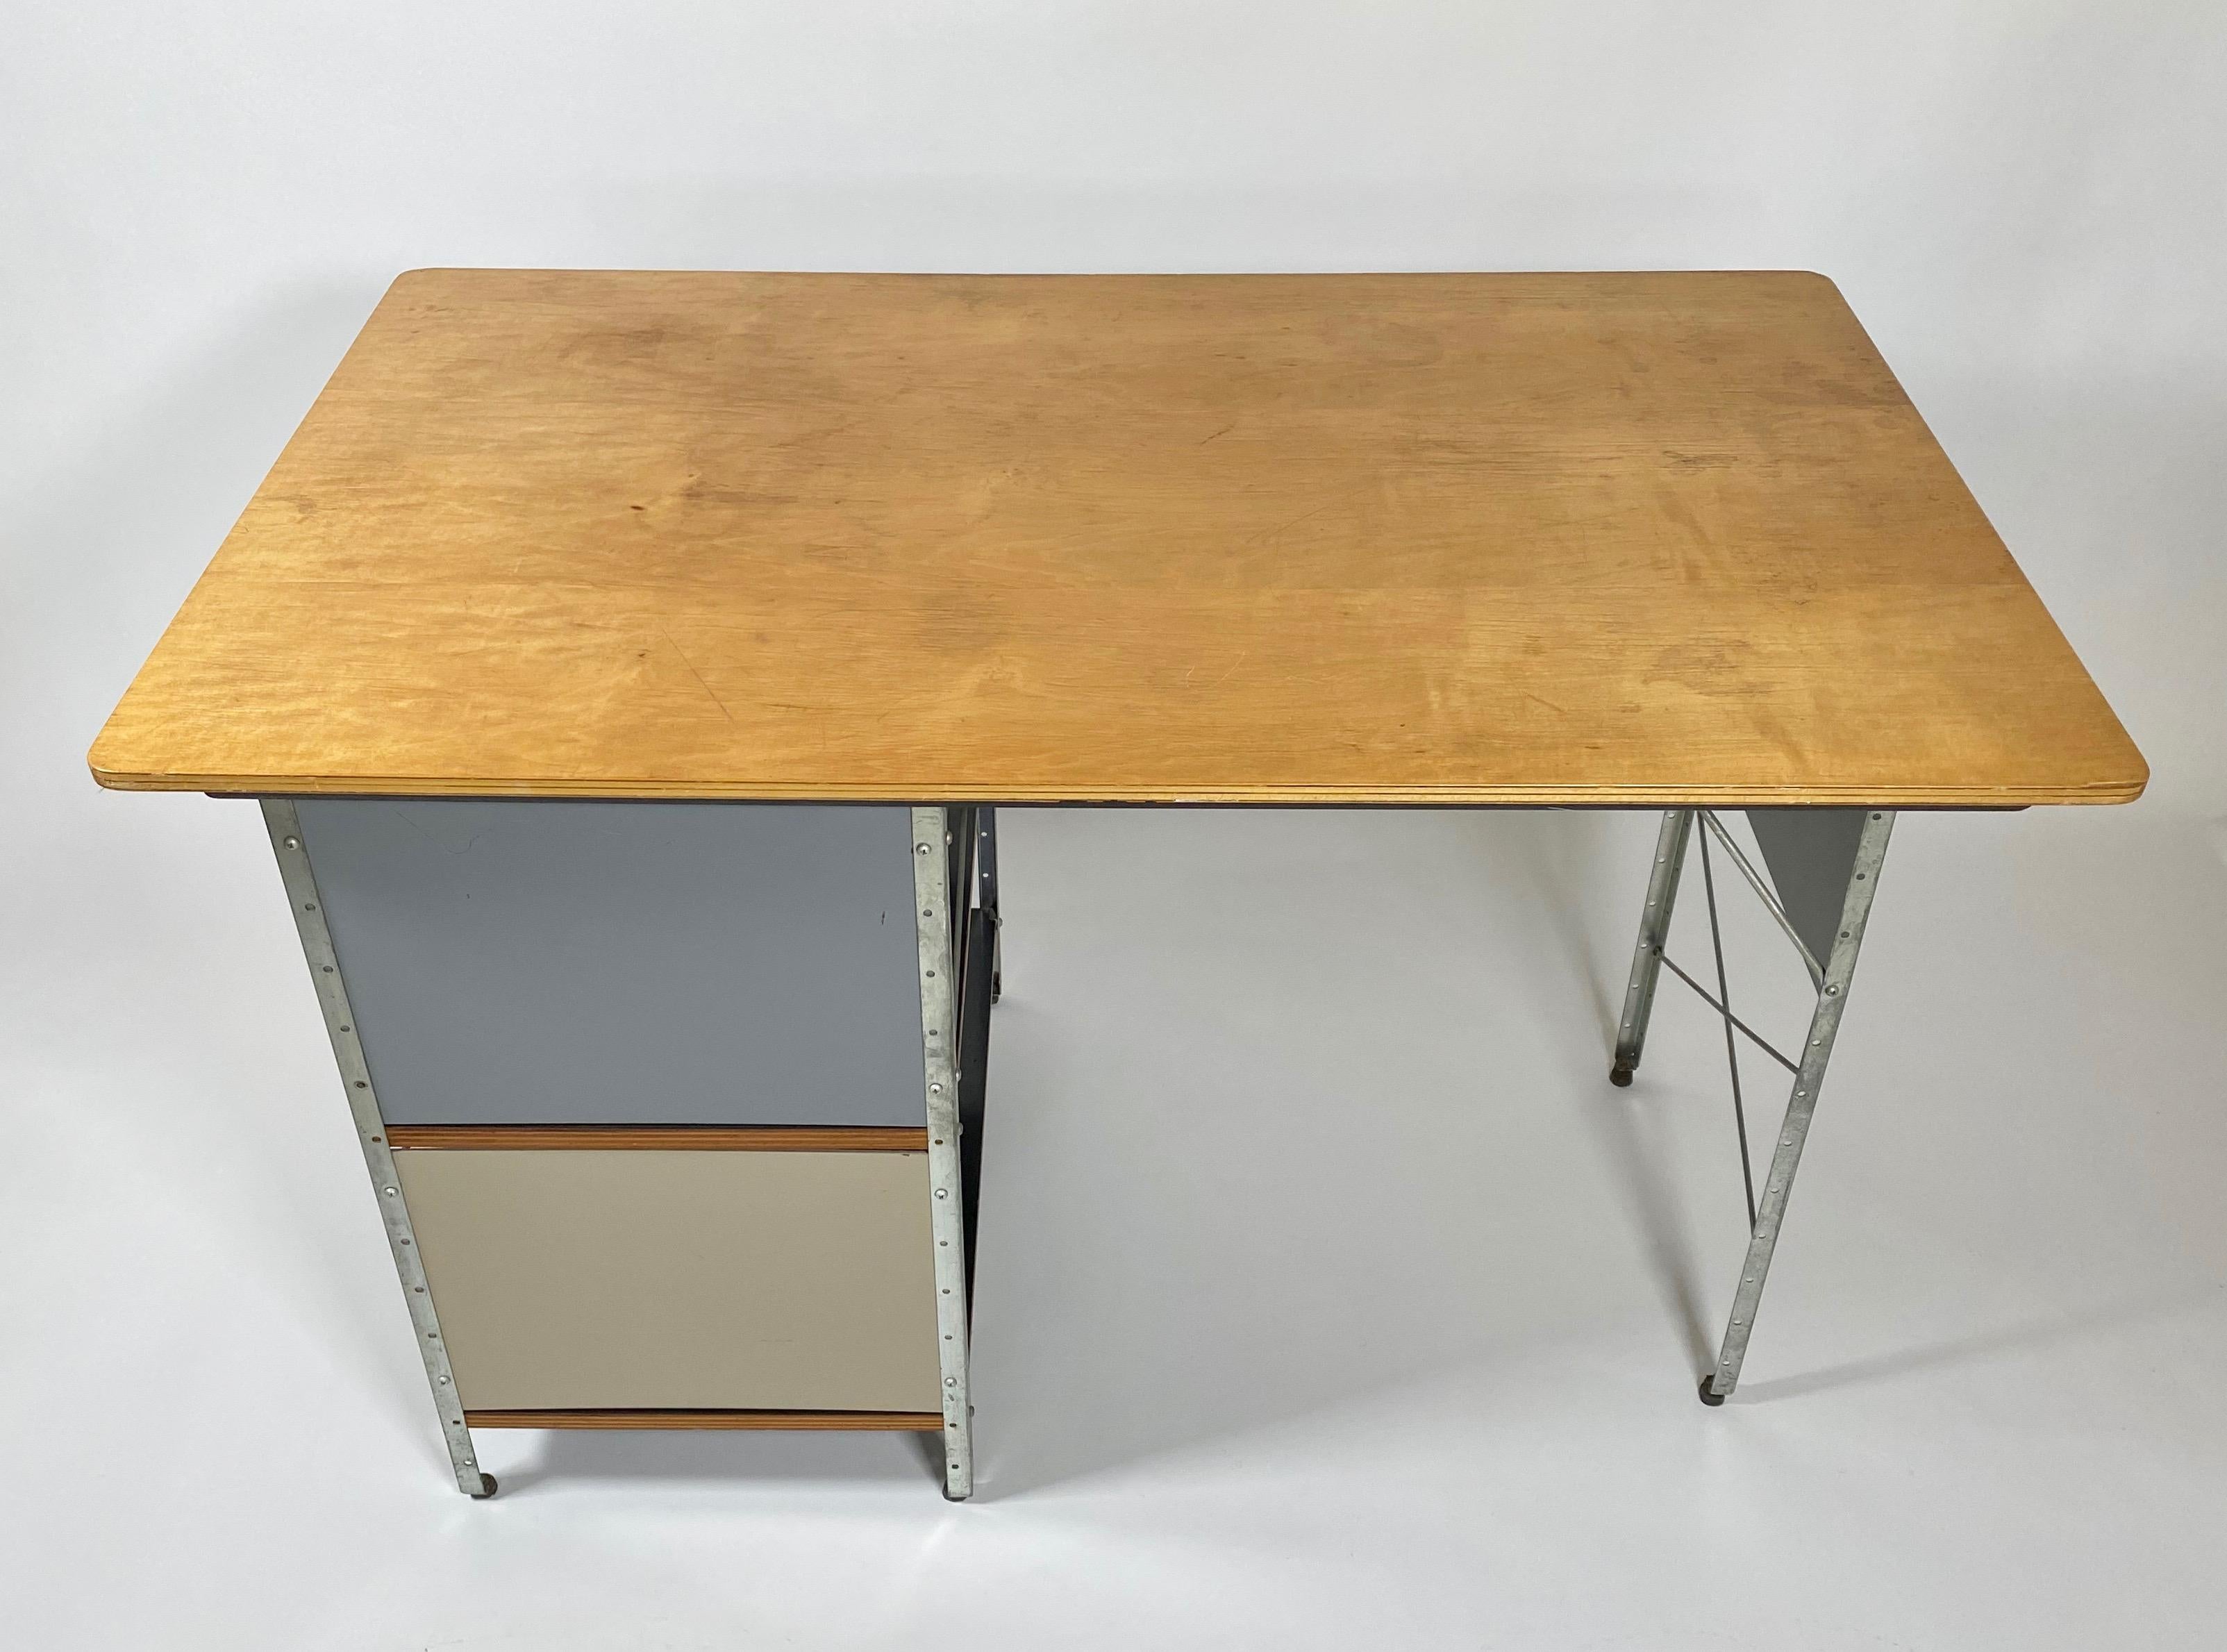 1st Generation ESU D-10-N Desk by Charles and Ray Eames In Good Condition In Oakland, CA